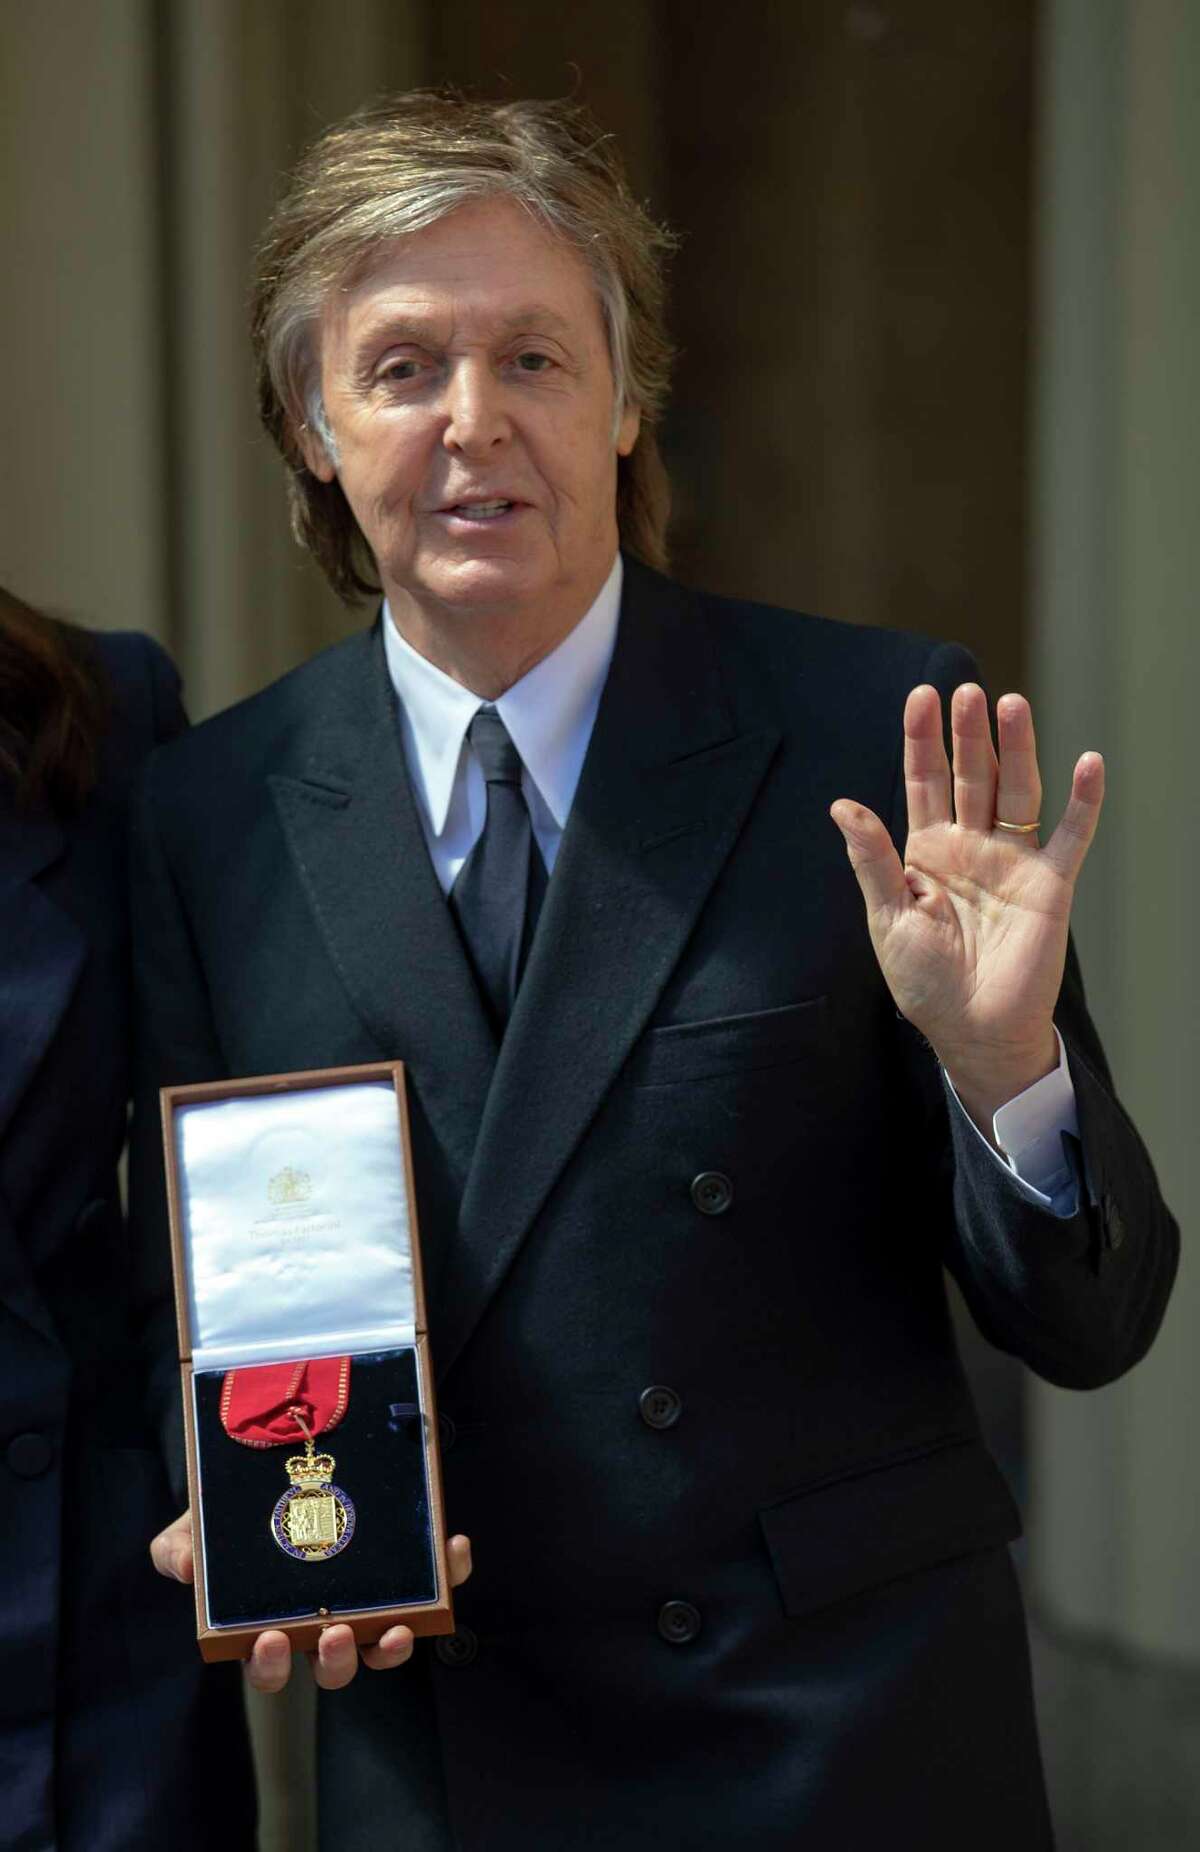 British musician Paul McCartney poses with his medal after an investiture ceremony at Buckingham Palace in London where was made a Companion of Honour on May 4, 2018. / AFP PHOTO / POOL / Steve ParsonsSTEVE PARSONS/AFP/Getty Images